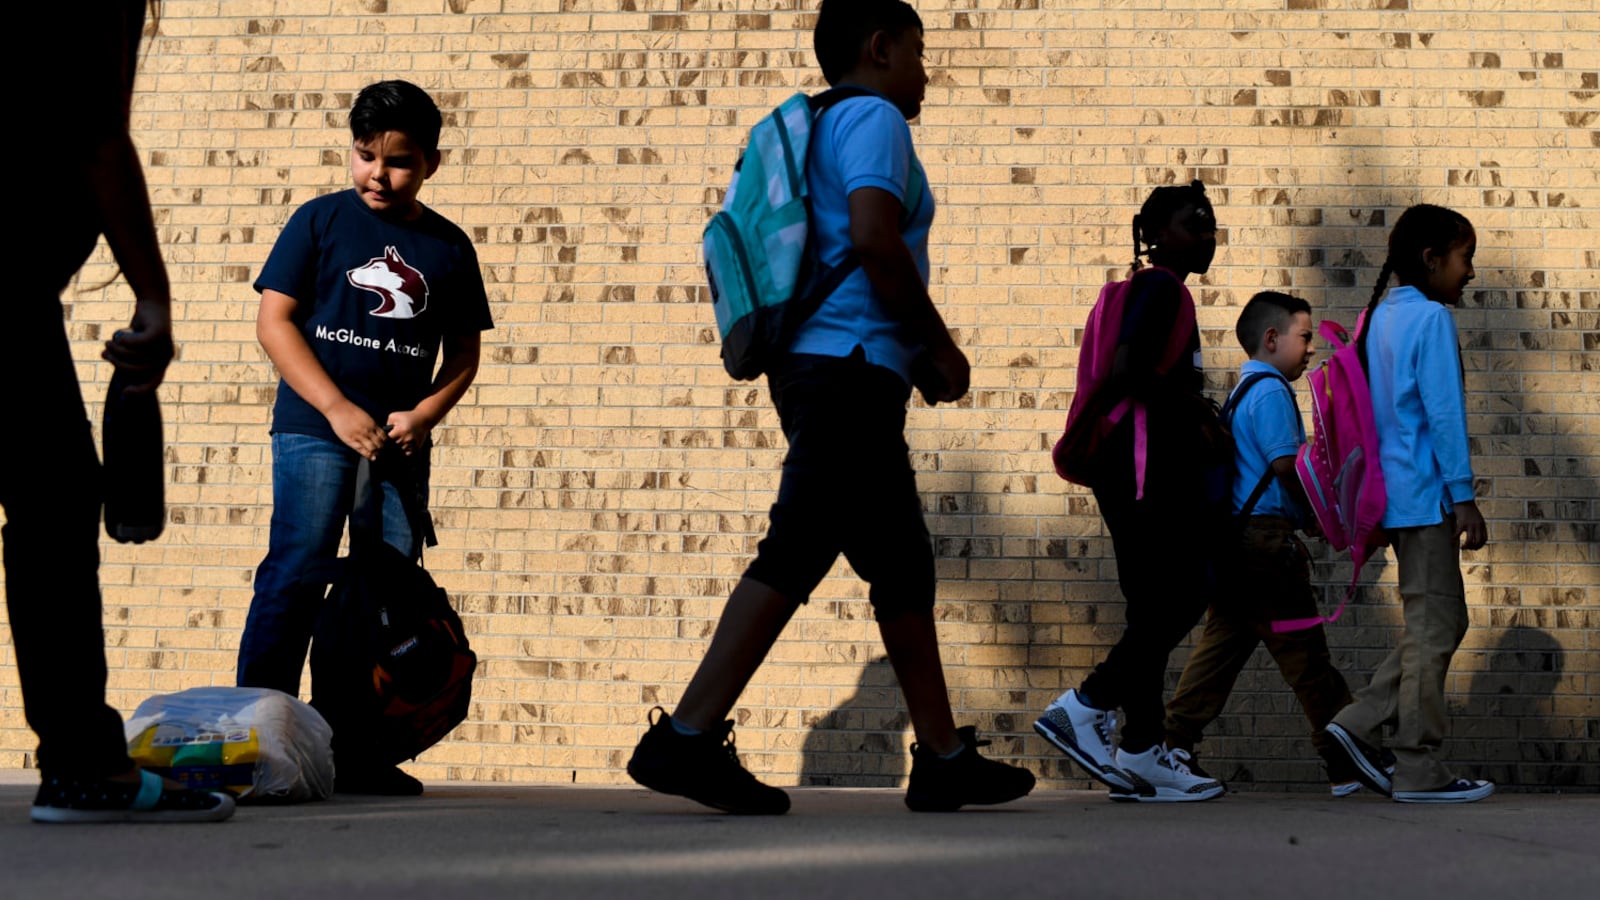 Students enter the building on the first day of school at Denver's McGlone Academy on Wednesday, August 15, 2018. (Photo by AAron Ontiveroz/The Denver Post via Getty Images)